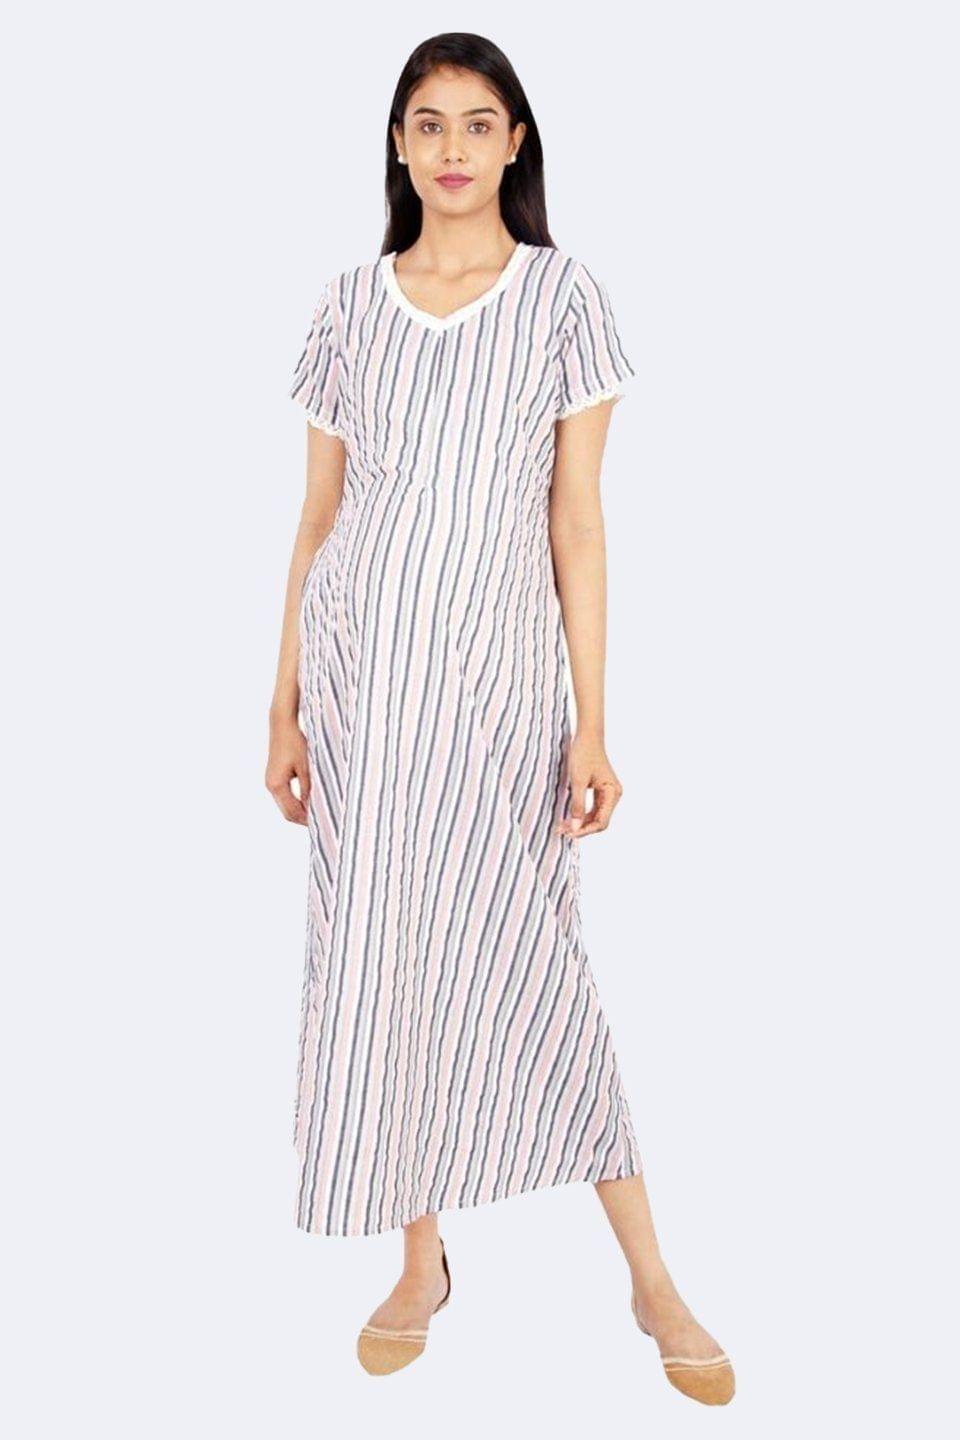 Morph Maternity  Pastel Stripes Feeding Night Gown With Vertical Nursing